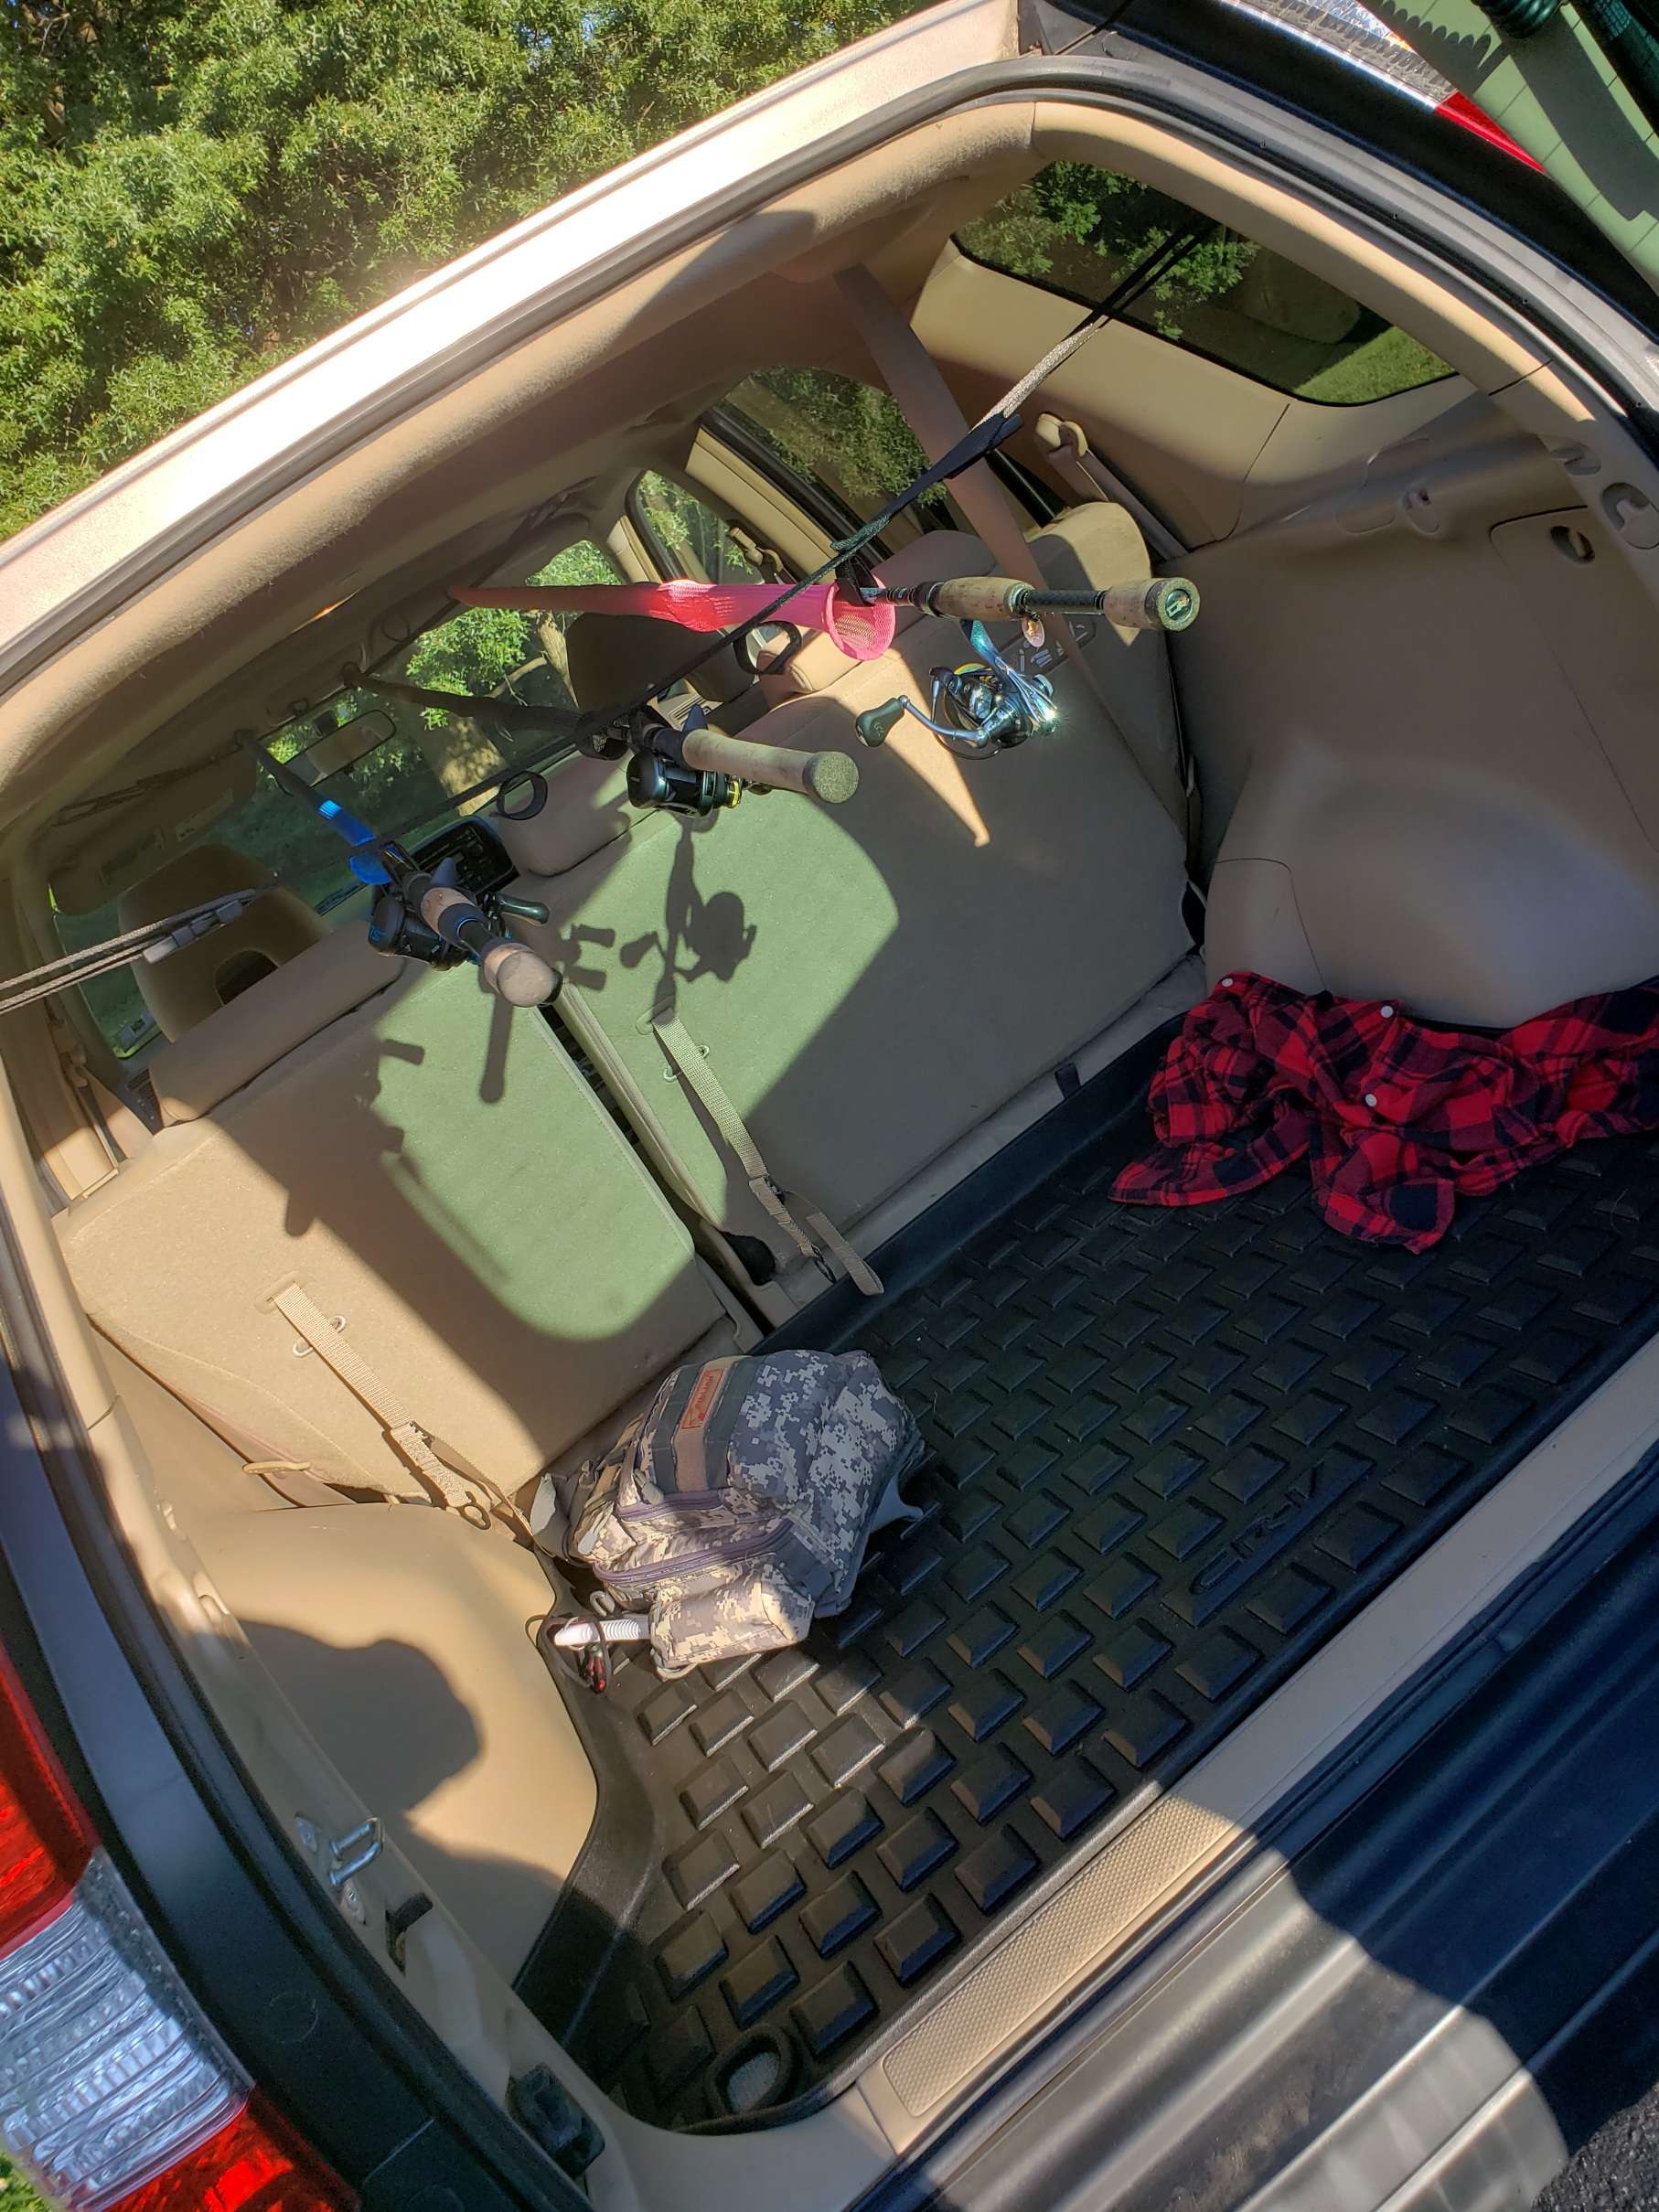 Best option for rod storage inside your car? - Fishing Rods, Reels, Line,  and Knots - Bass Fishing Forums